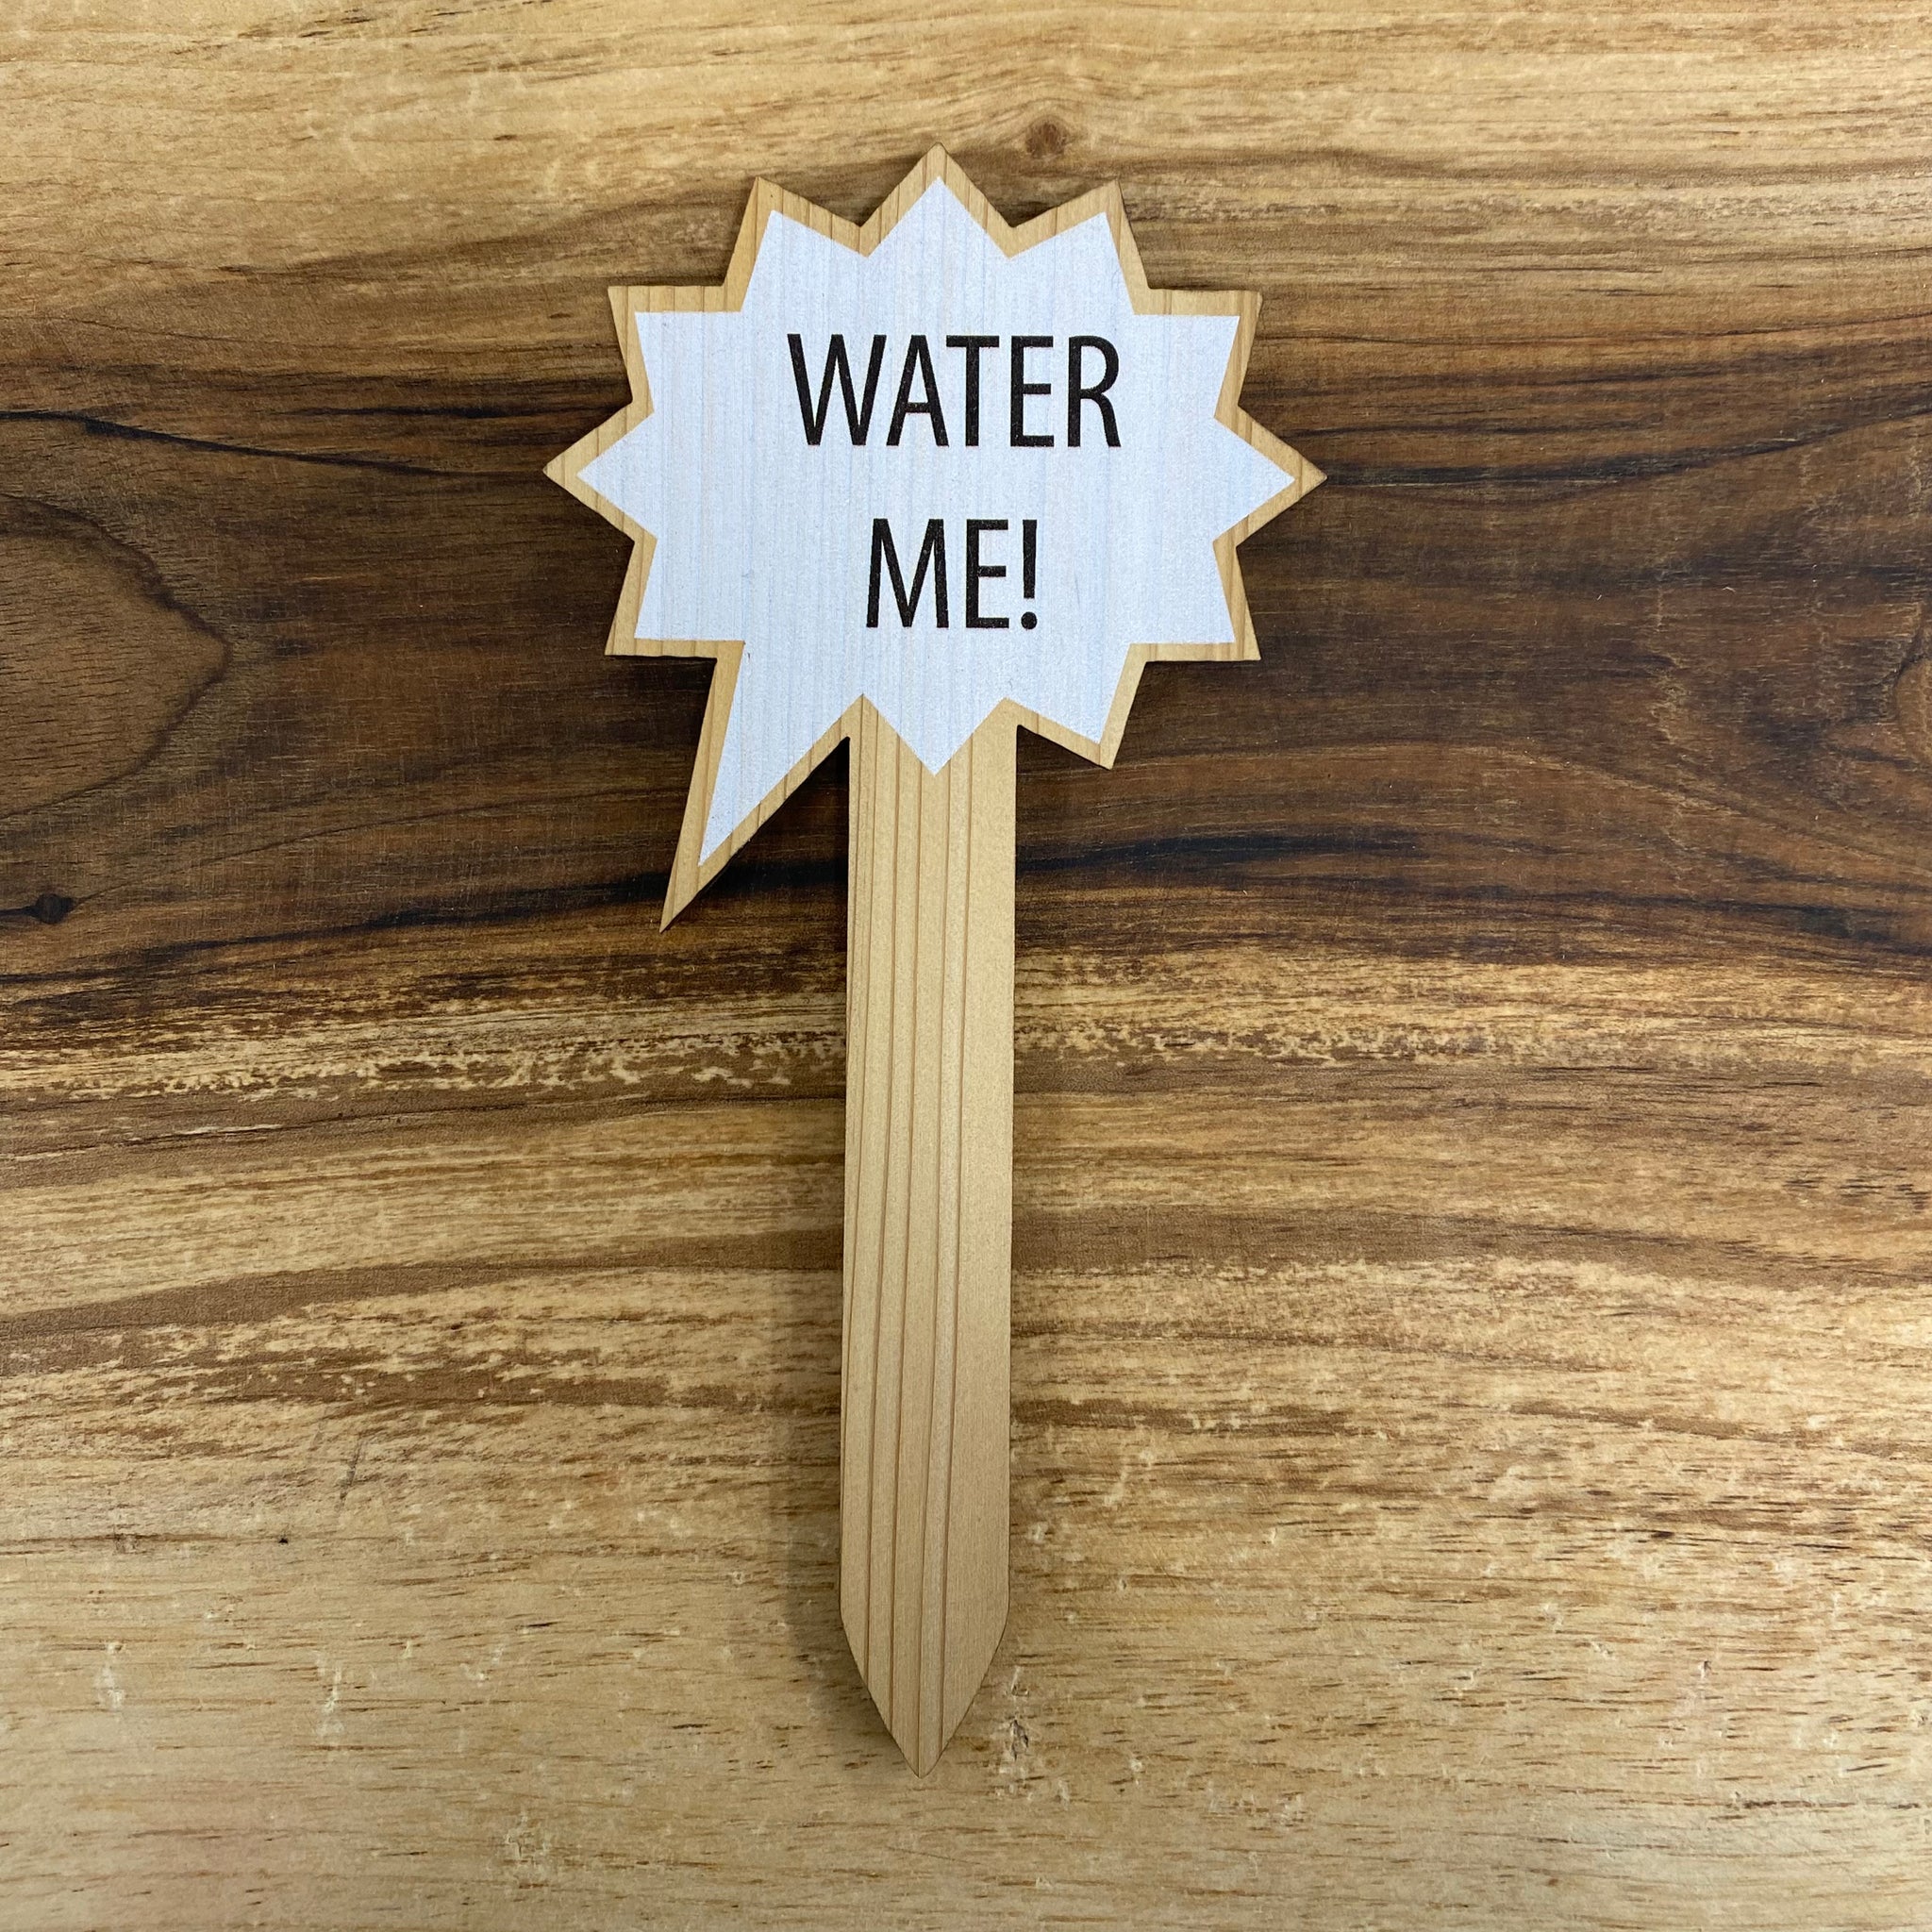 Woodly - Reclaimed Wood Garden and Plant Stakes - all things being eco chilliwack - water me